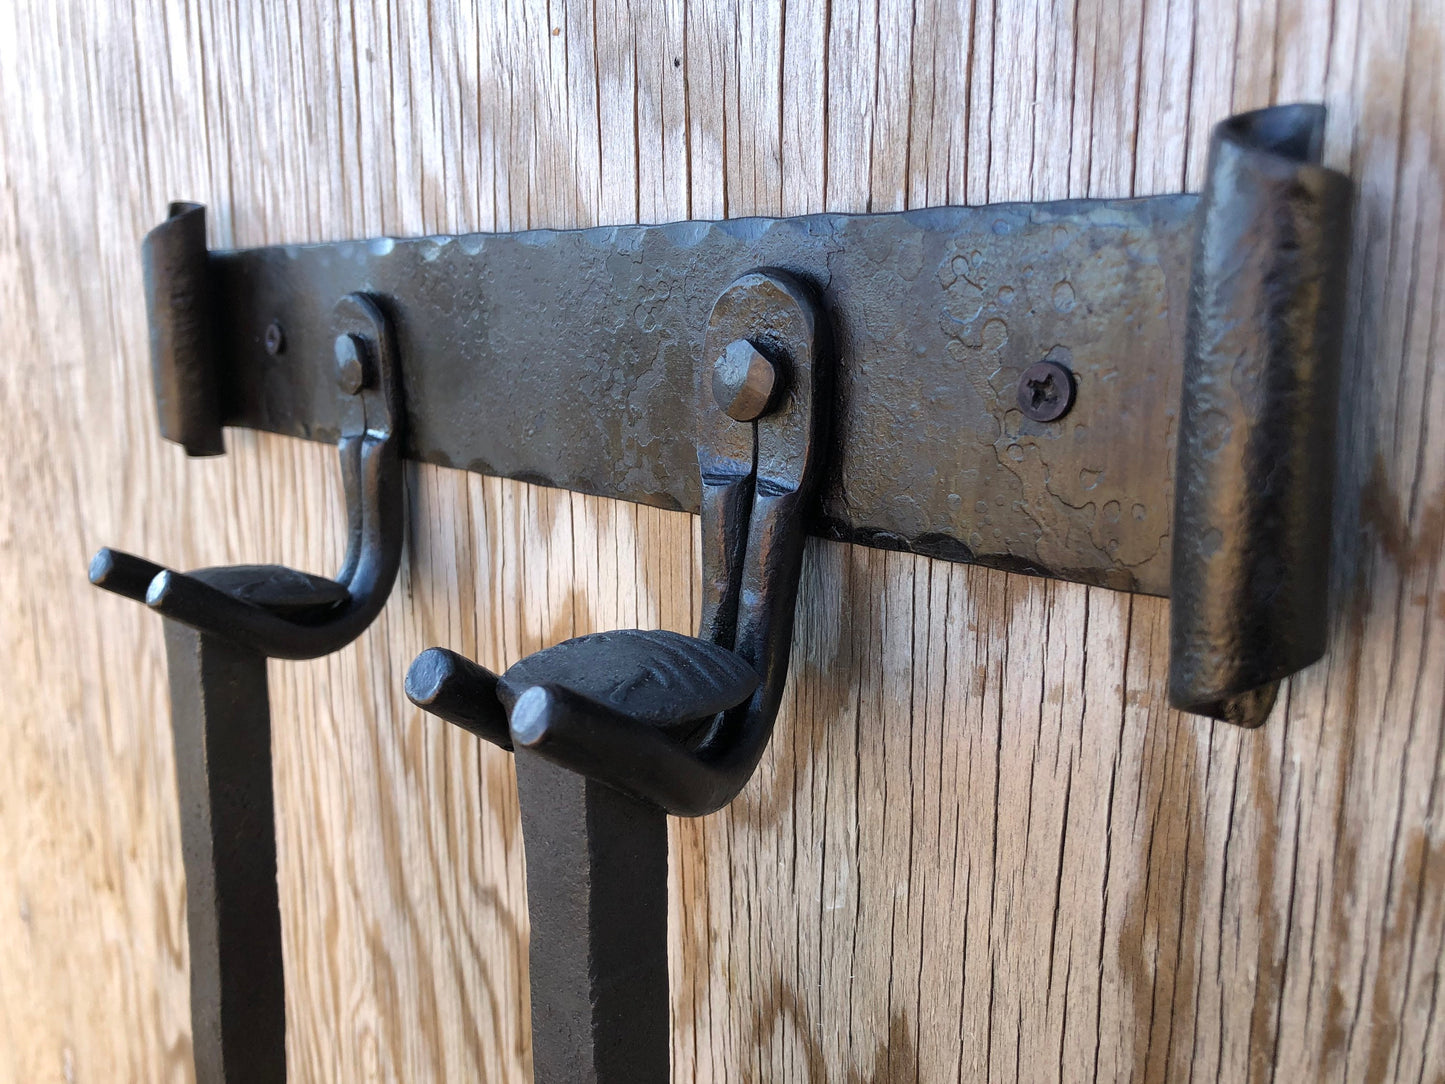 Metal Rack Hand Forged - Fireplace Tool Hanger - Kitchen  - Hooks - Hand Forged - Wall Mounted Hooks - Handmade In USA